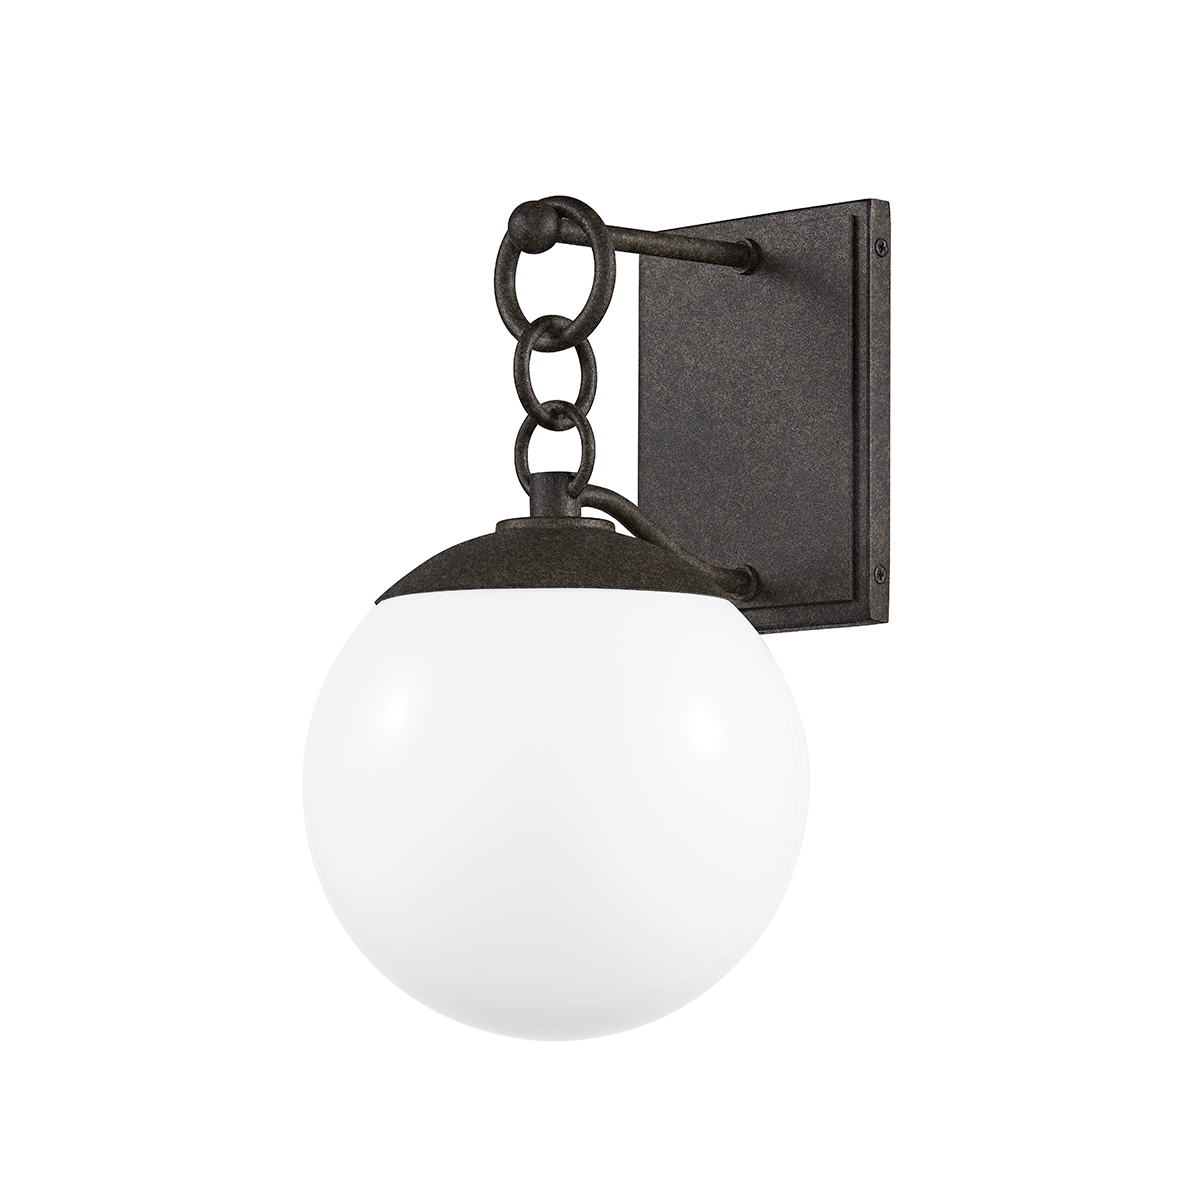 Troy Lighting 1 LIGHT SMALL EXTERIOR WALL SCONCE B1508